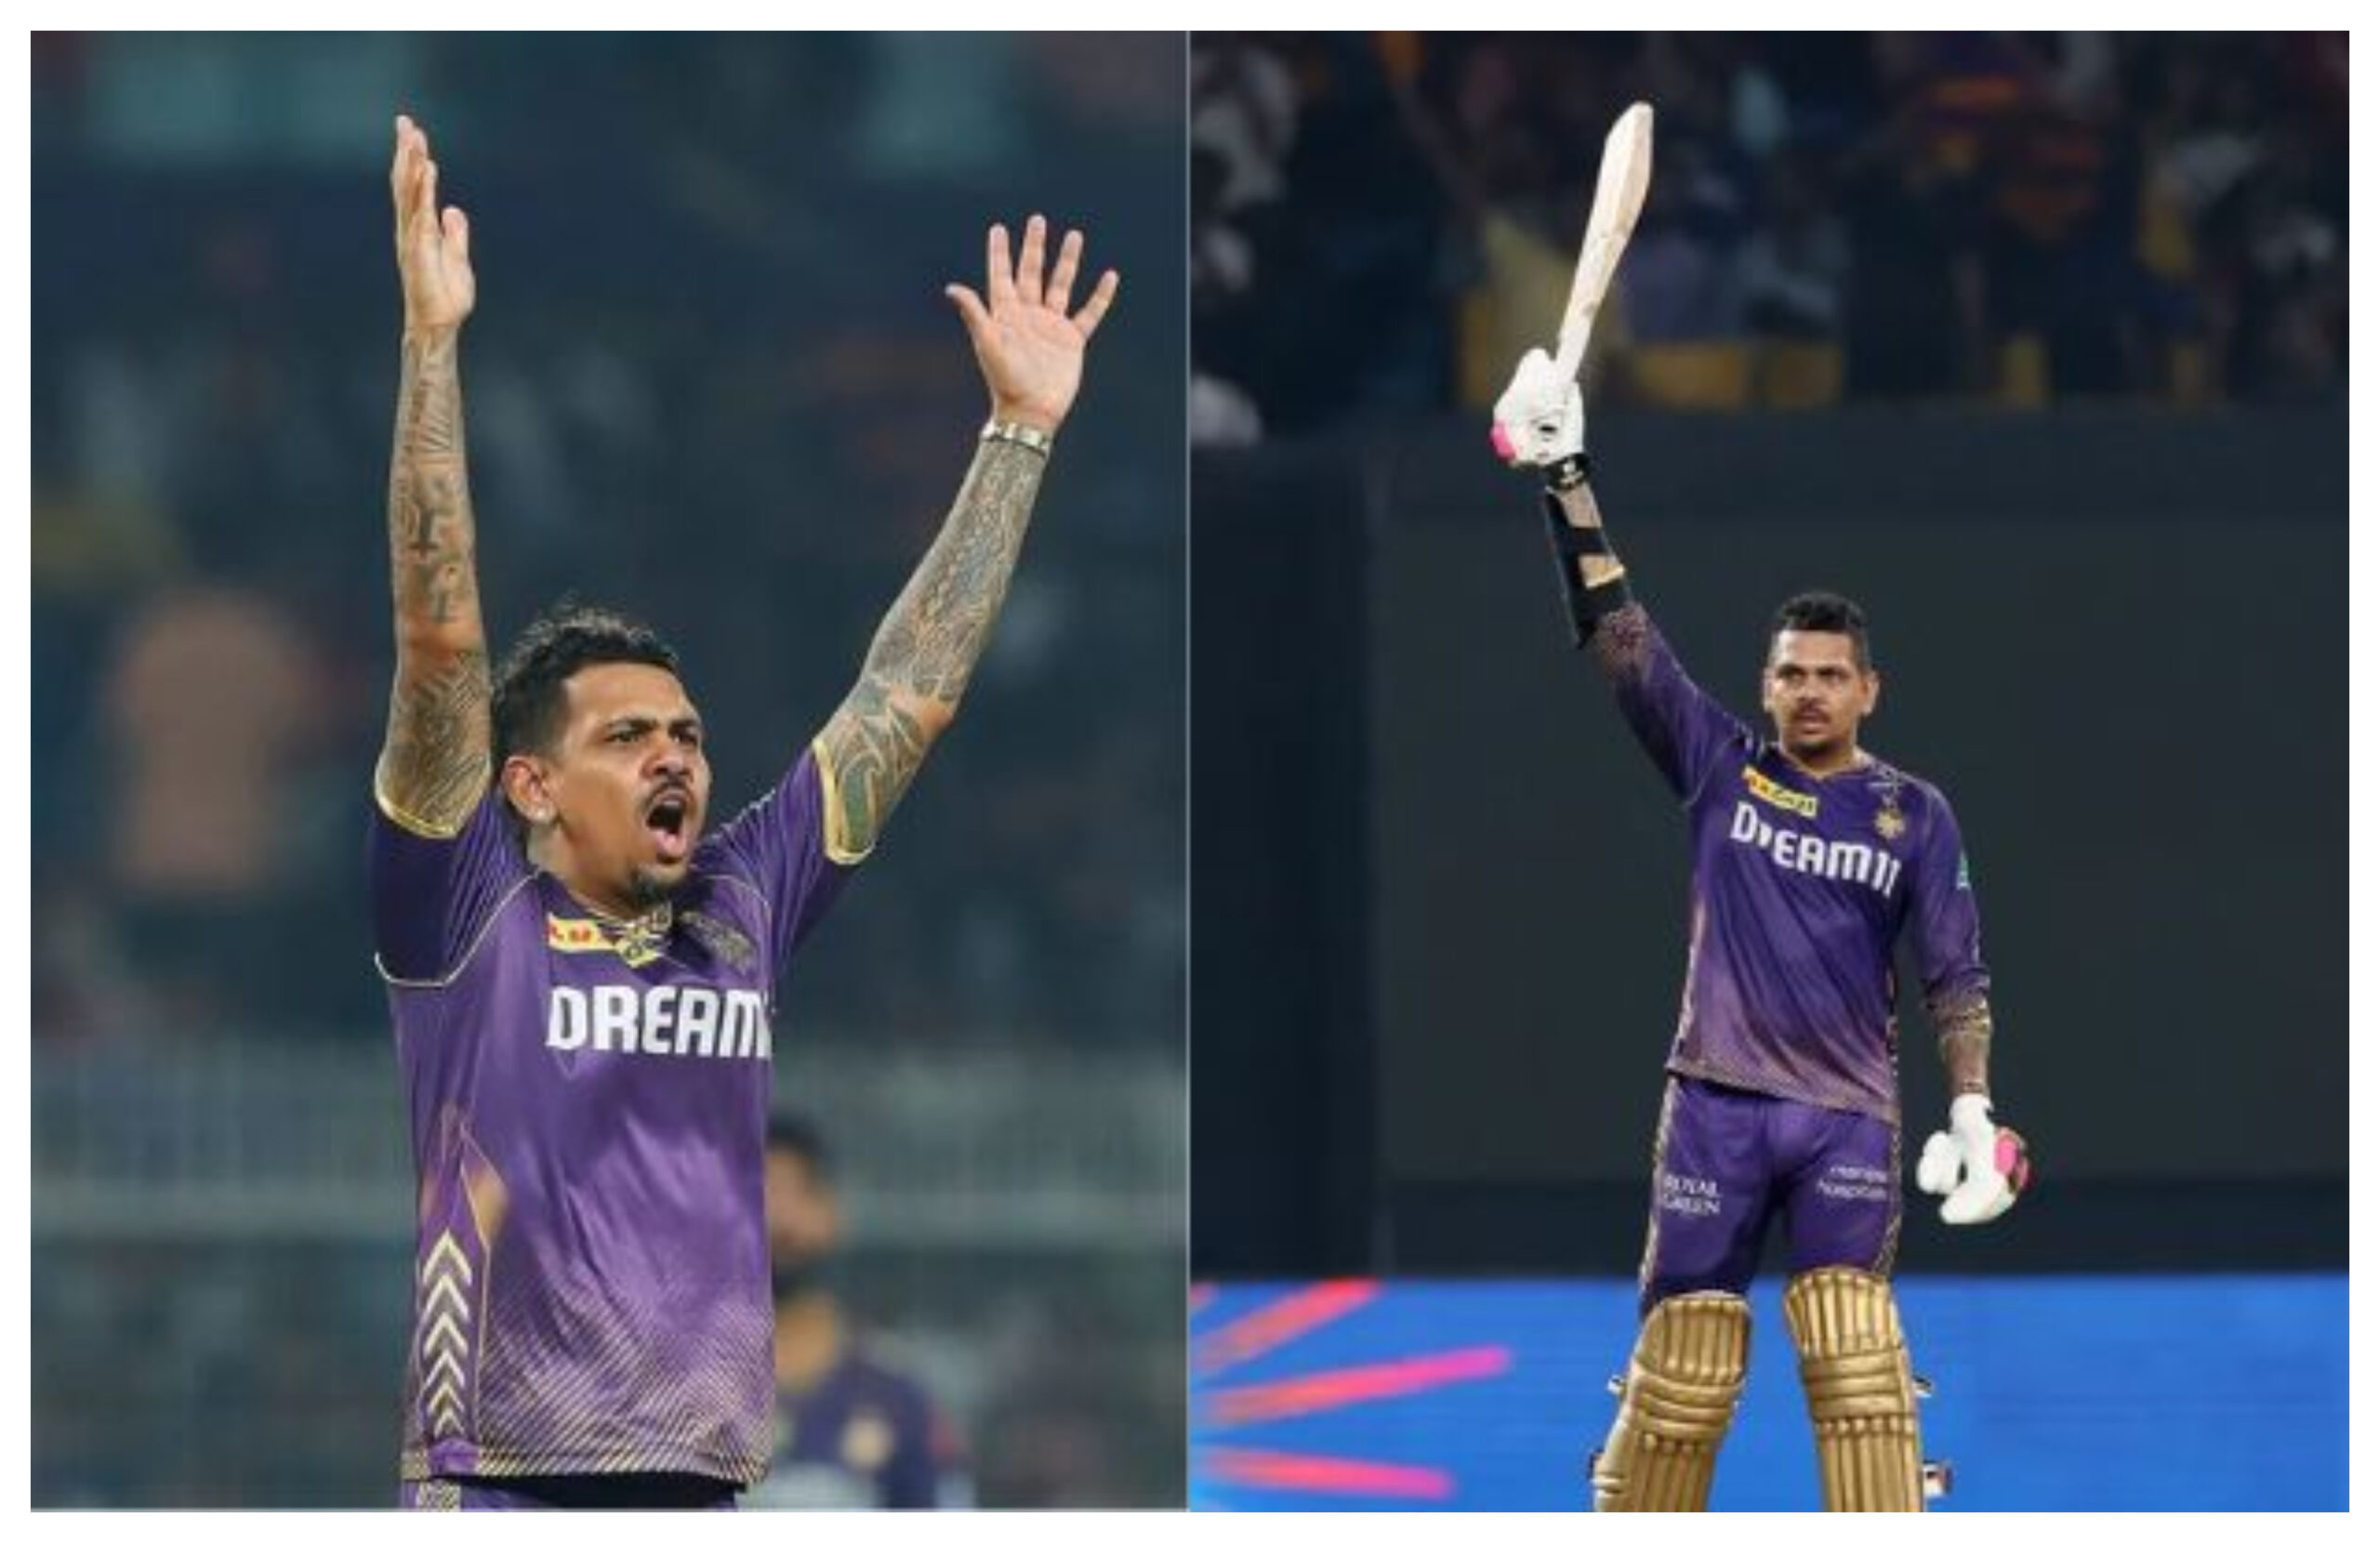 T20: Sunil Narine ruled out the possibility of returning to the T20 World Cup